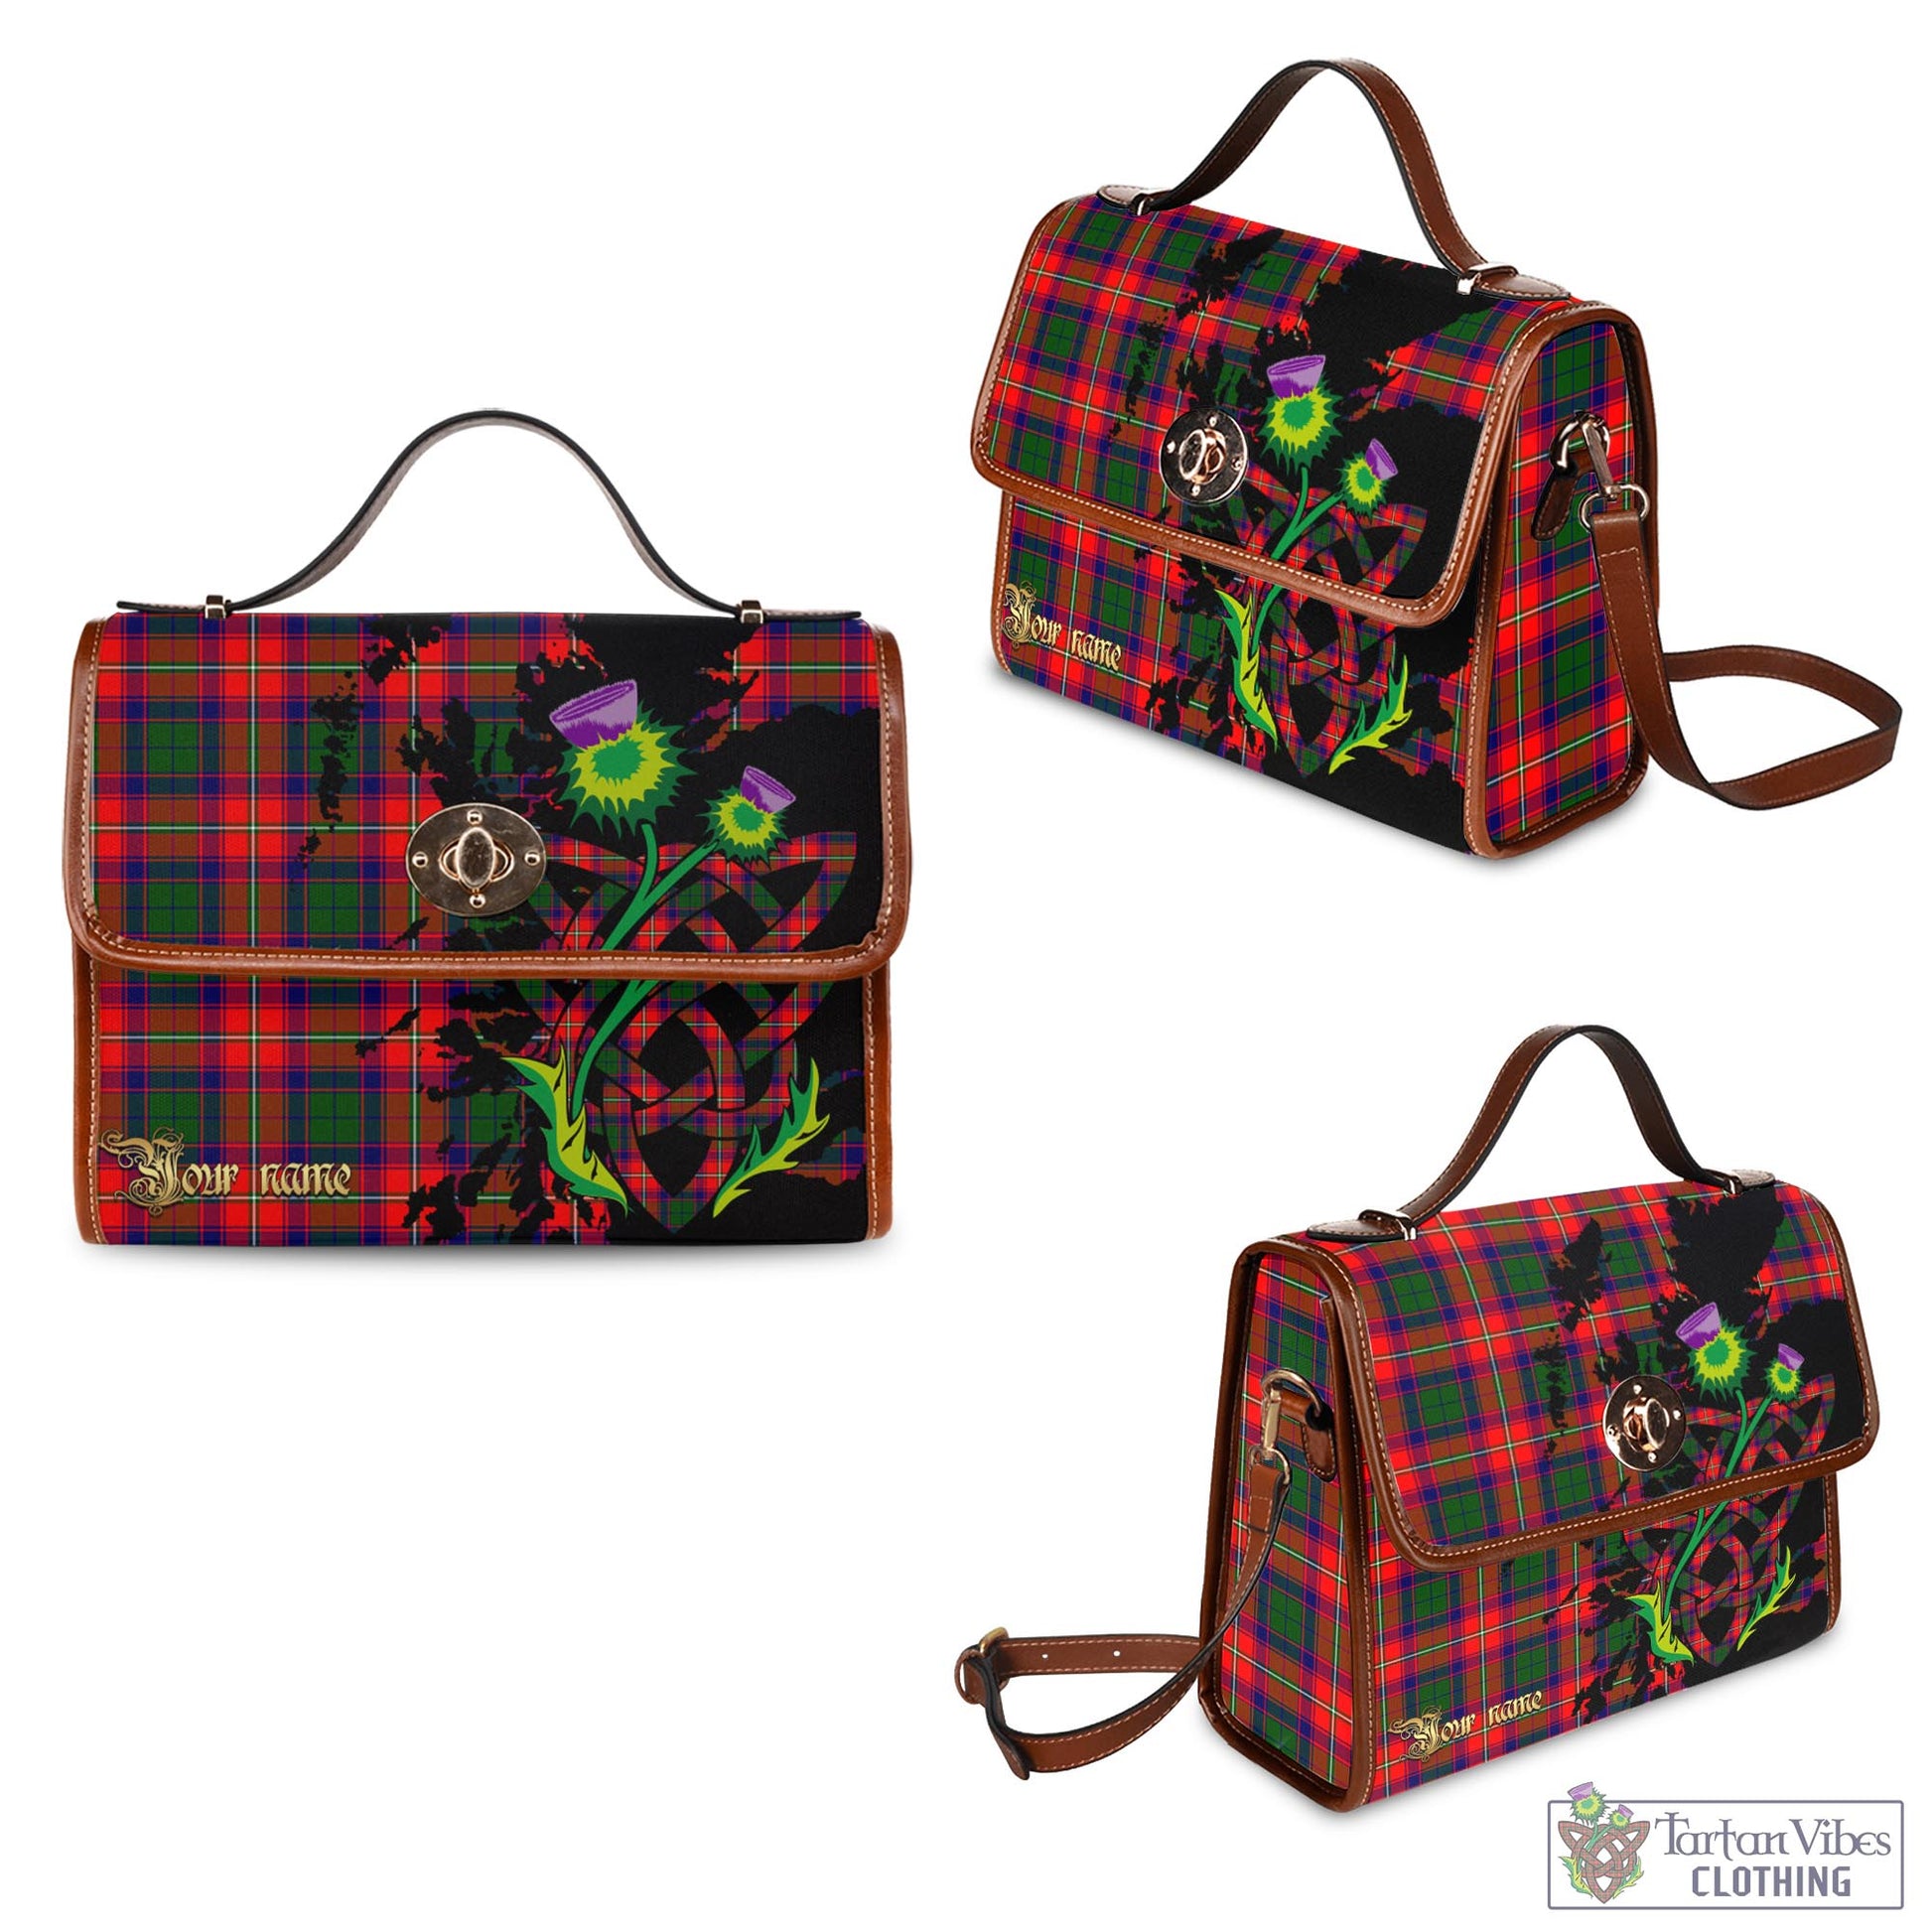 Tartan Vibes Clothing Hopkirk Tartan Waterproof Canvas Bag with Scotland Map and Thistle Celtic Accents